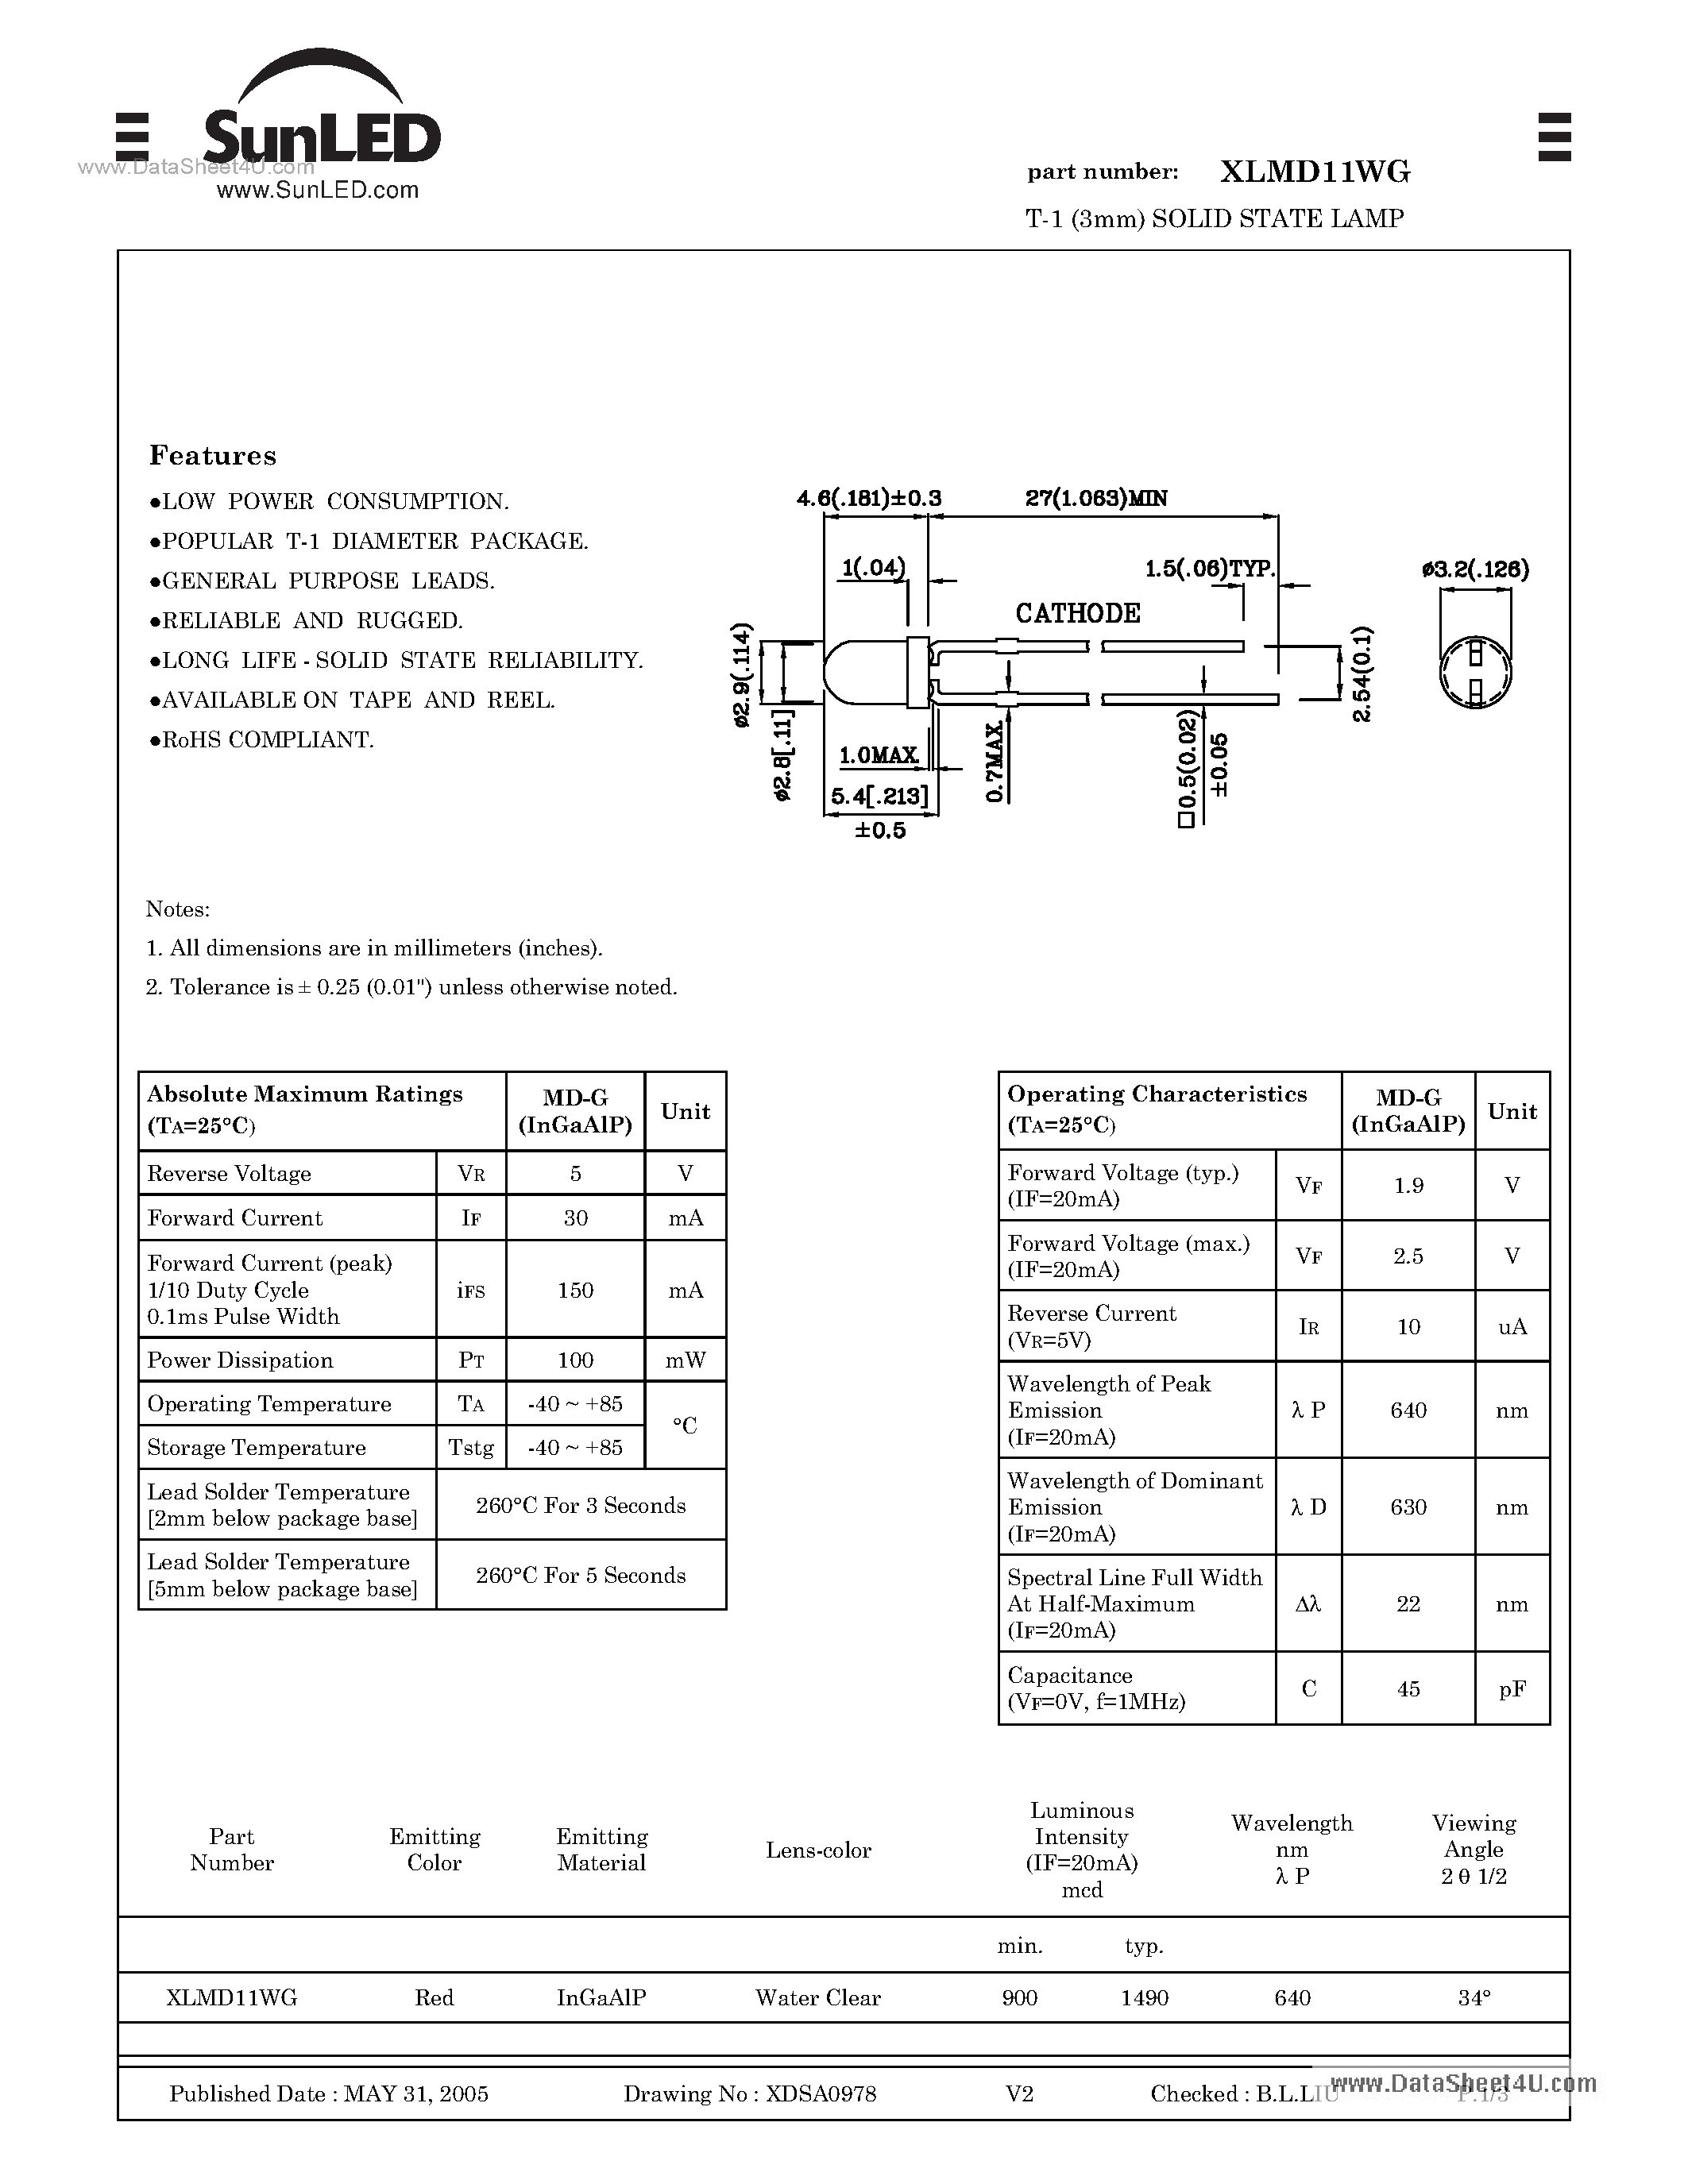 Datasheet XLMD11WG - SOLID STATE LAMP page 1